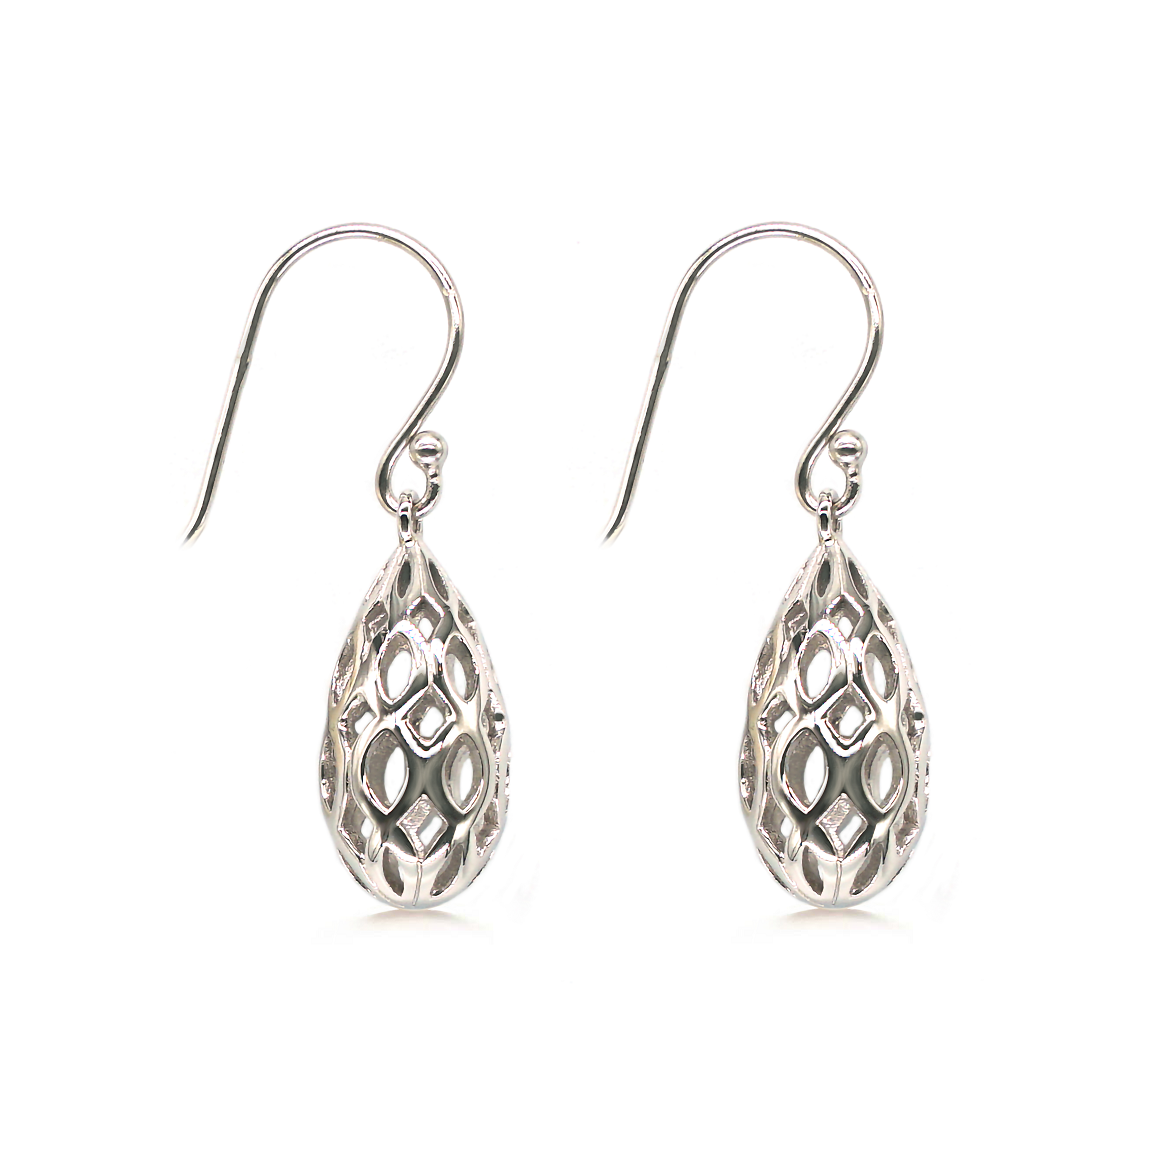 Lantern On The Beach Earrings - Rhodium Plated Sterling Silver